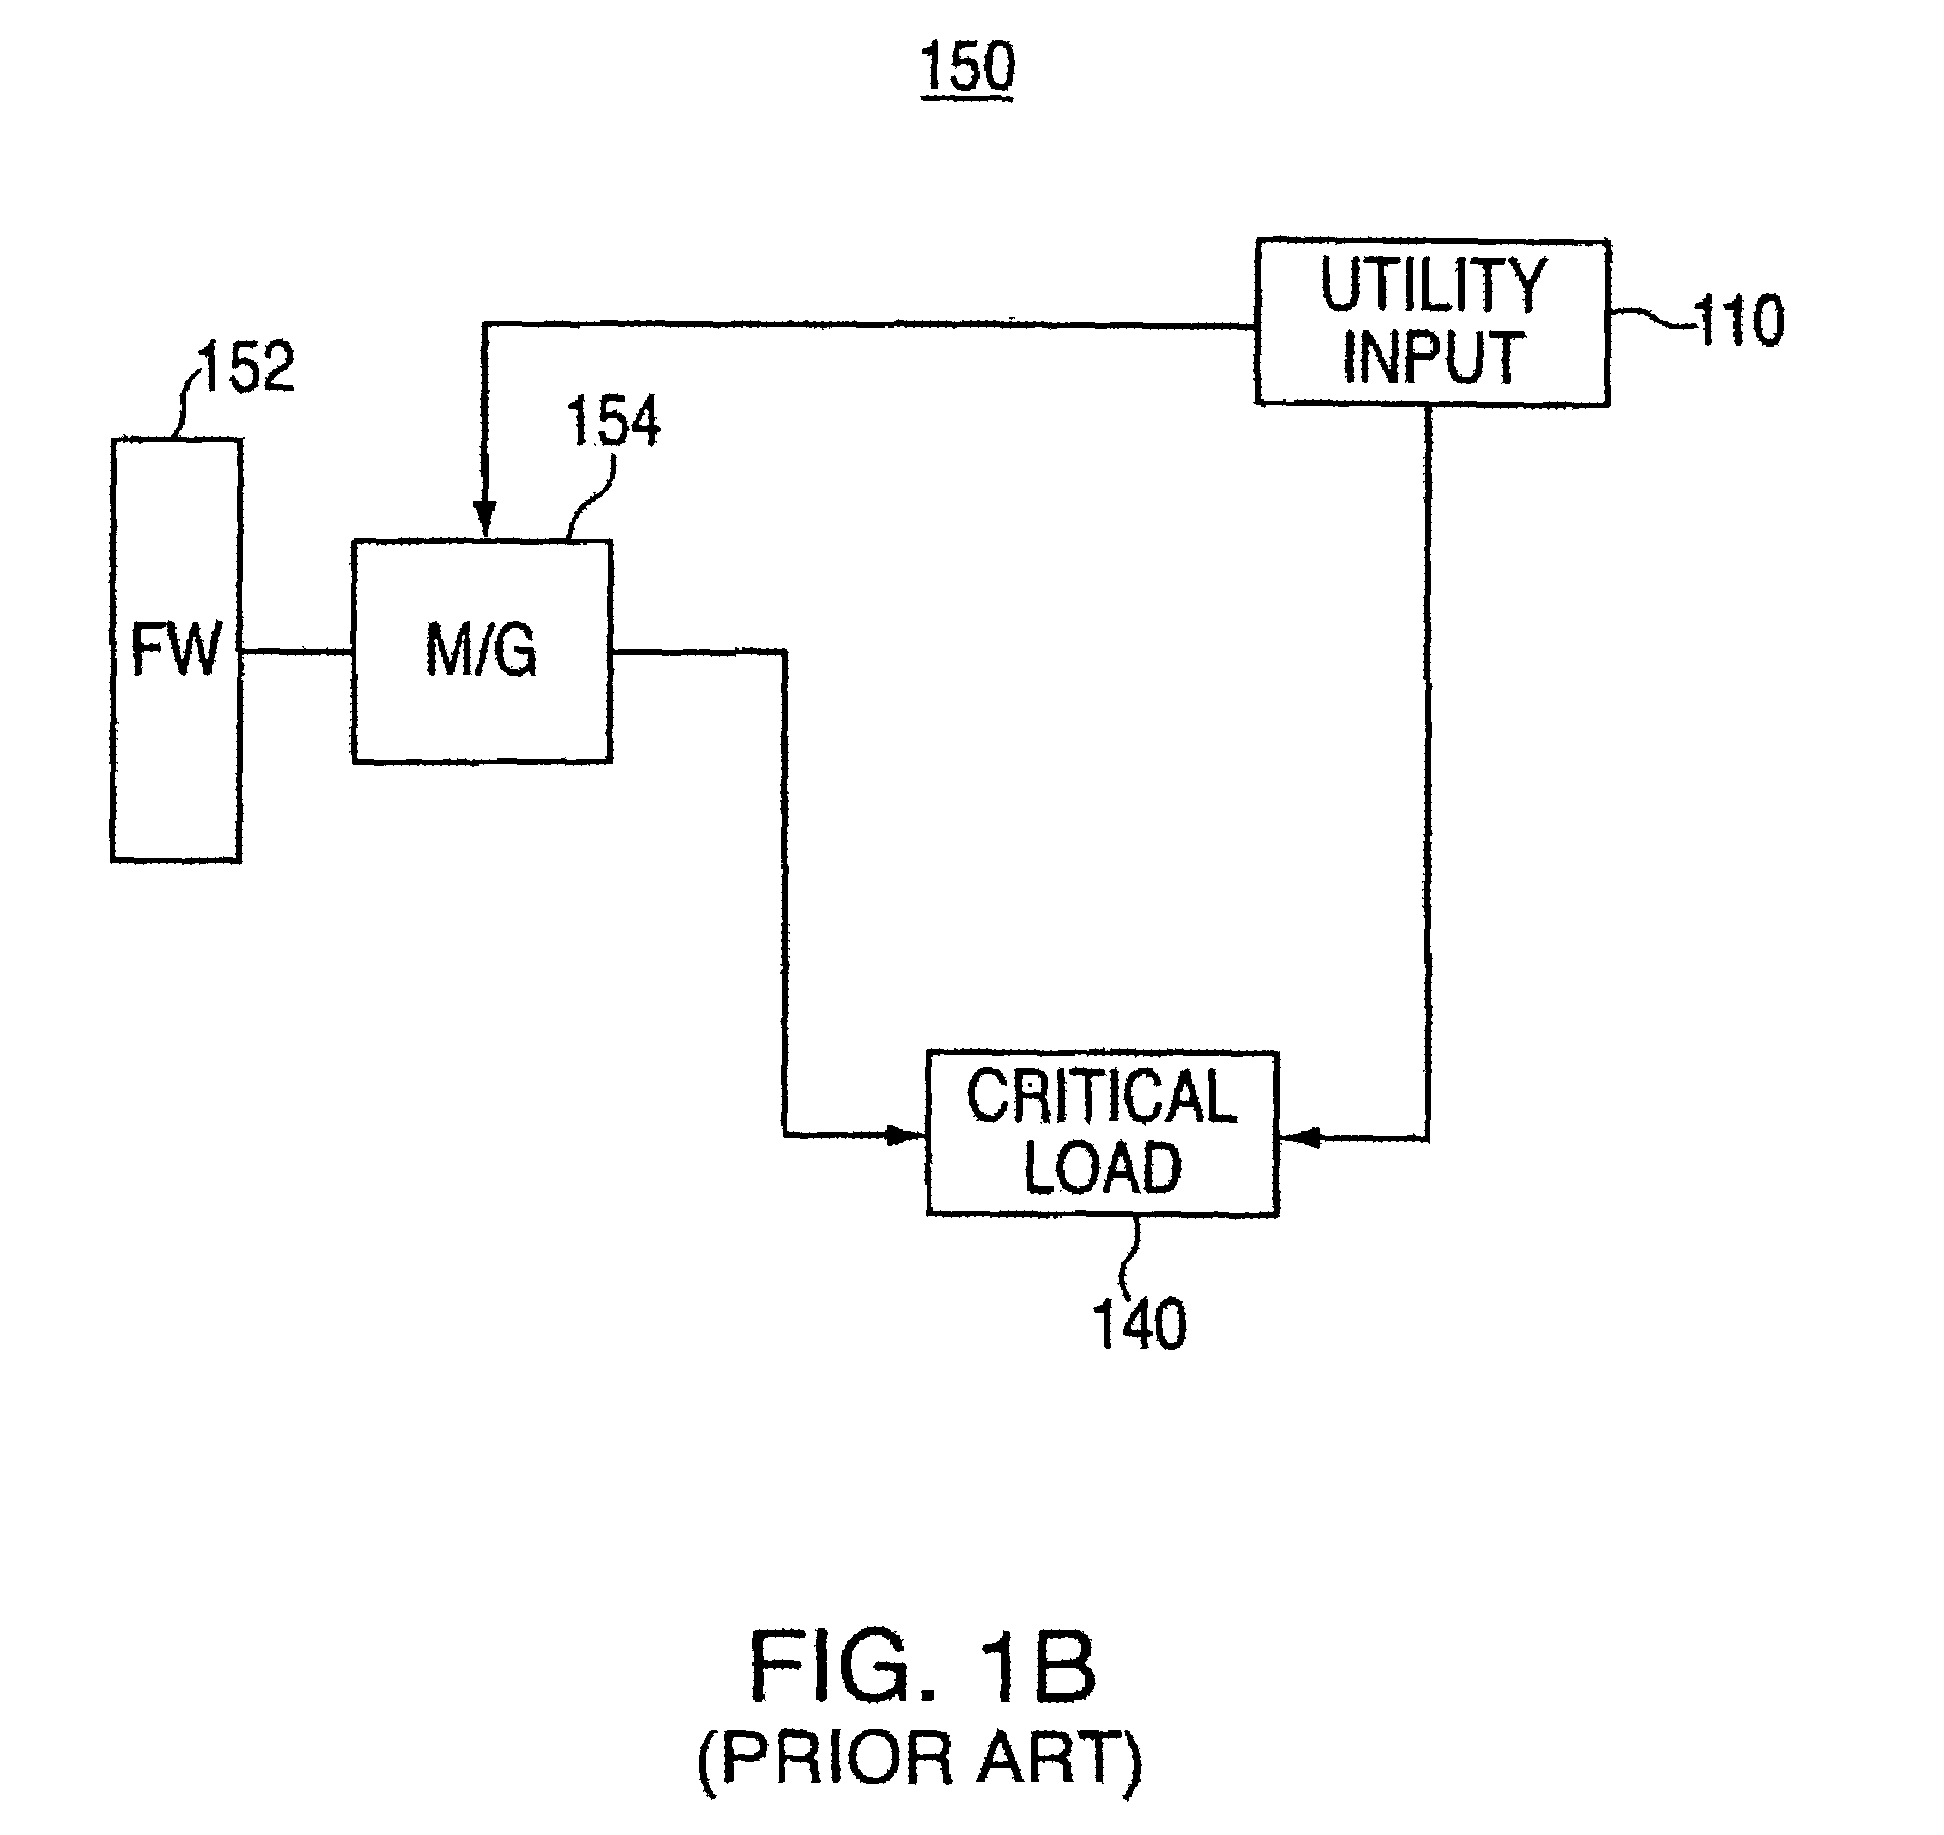 Systems and methods for providing backup energy to a load